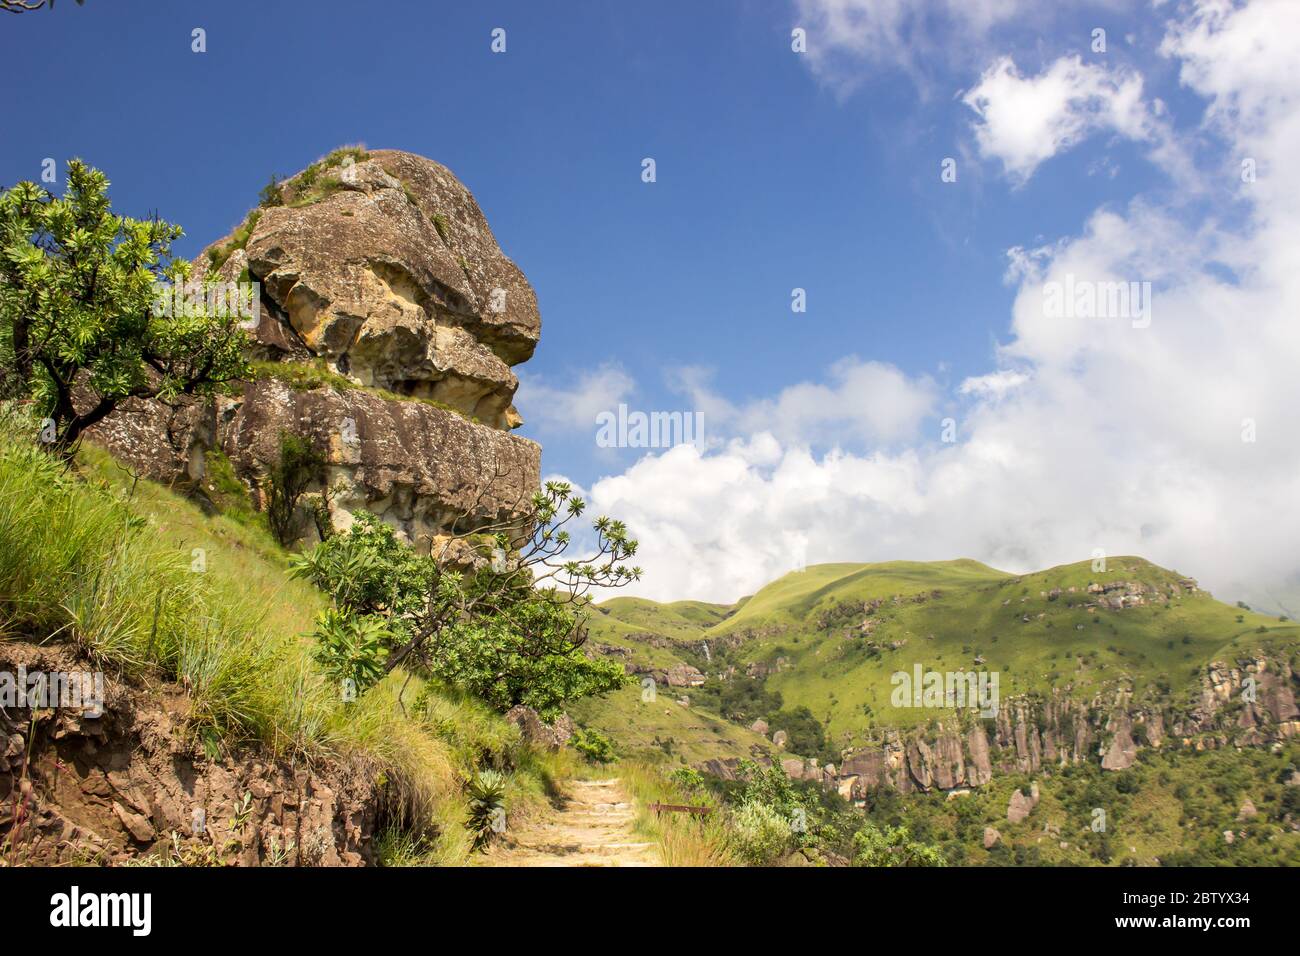 A weathered sandstone formation known as the Sphinx’s, in the Monks Cowl region of the Drakensberg, South Africa Stock Photo